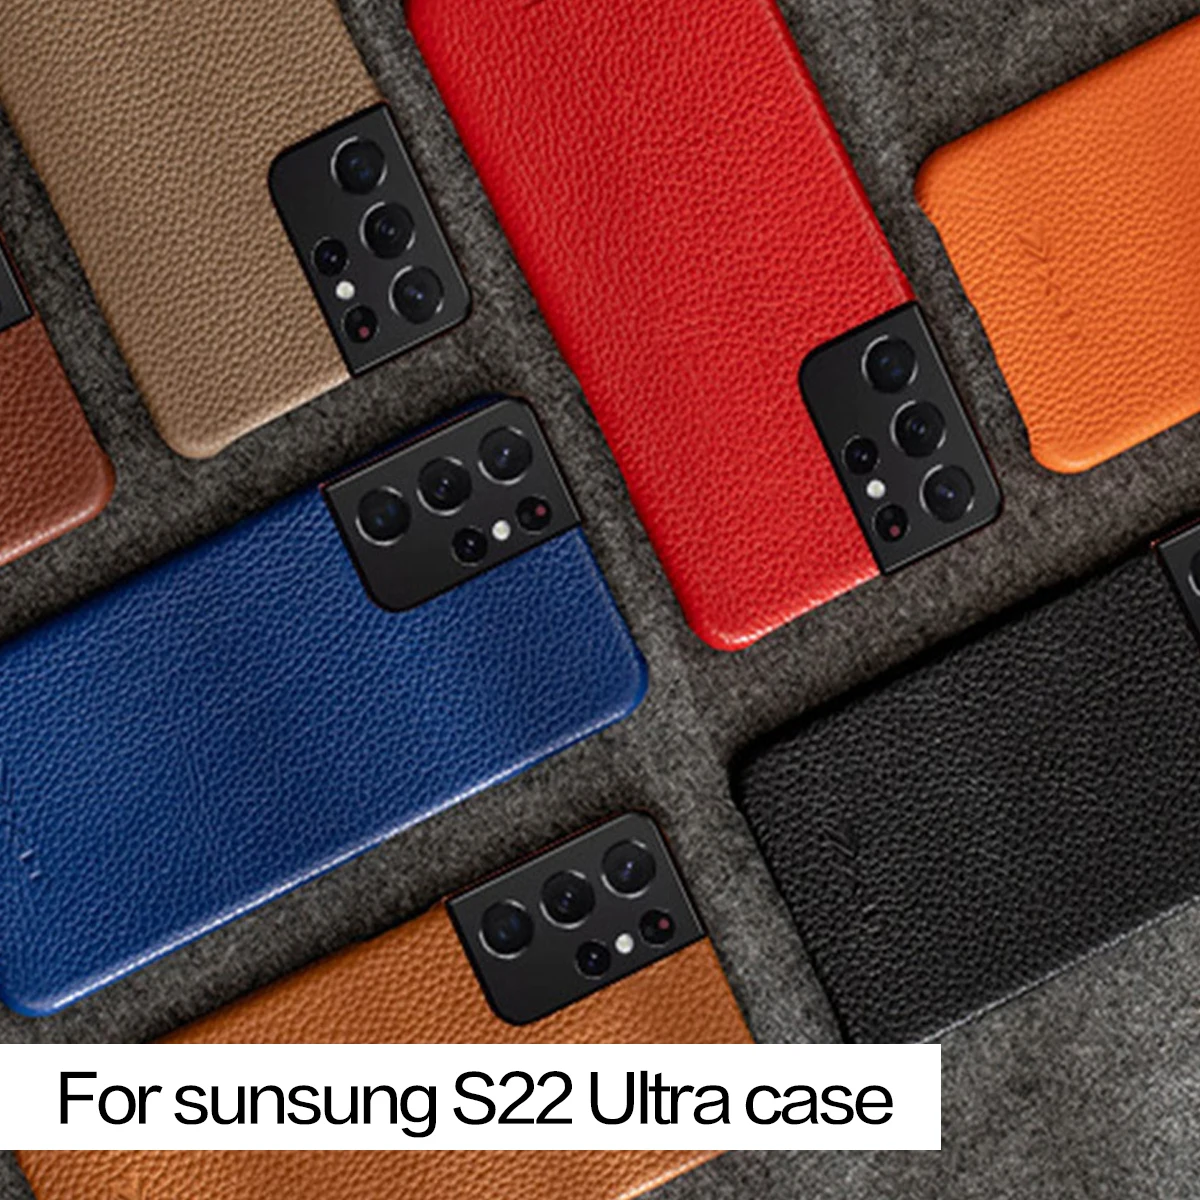 For Samsung Galaxy S22 UItra Case,Leather Shockproof Phone Case Durable Minimalist Ultra Thin Cover Protective Phone Case